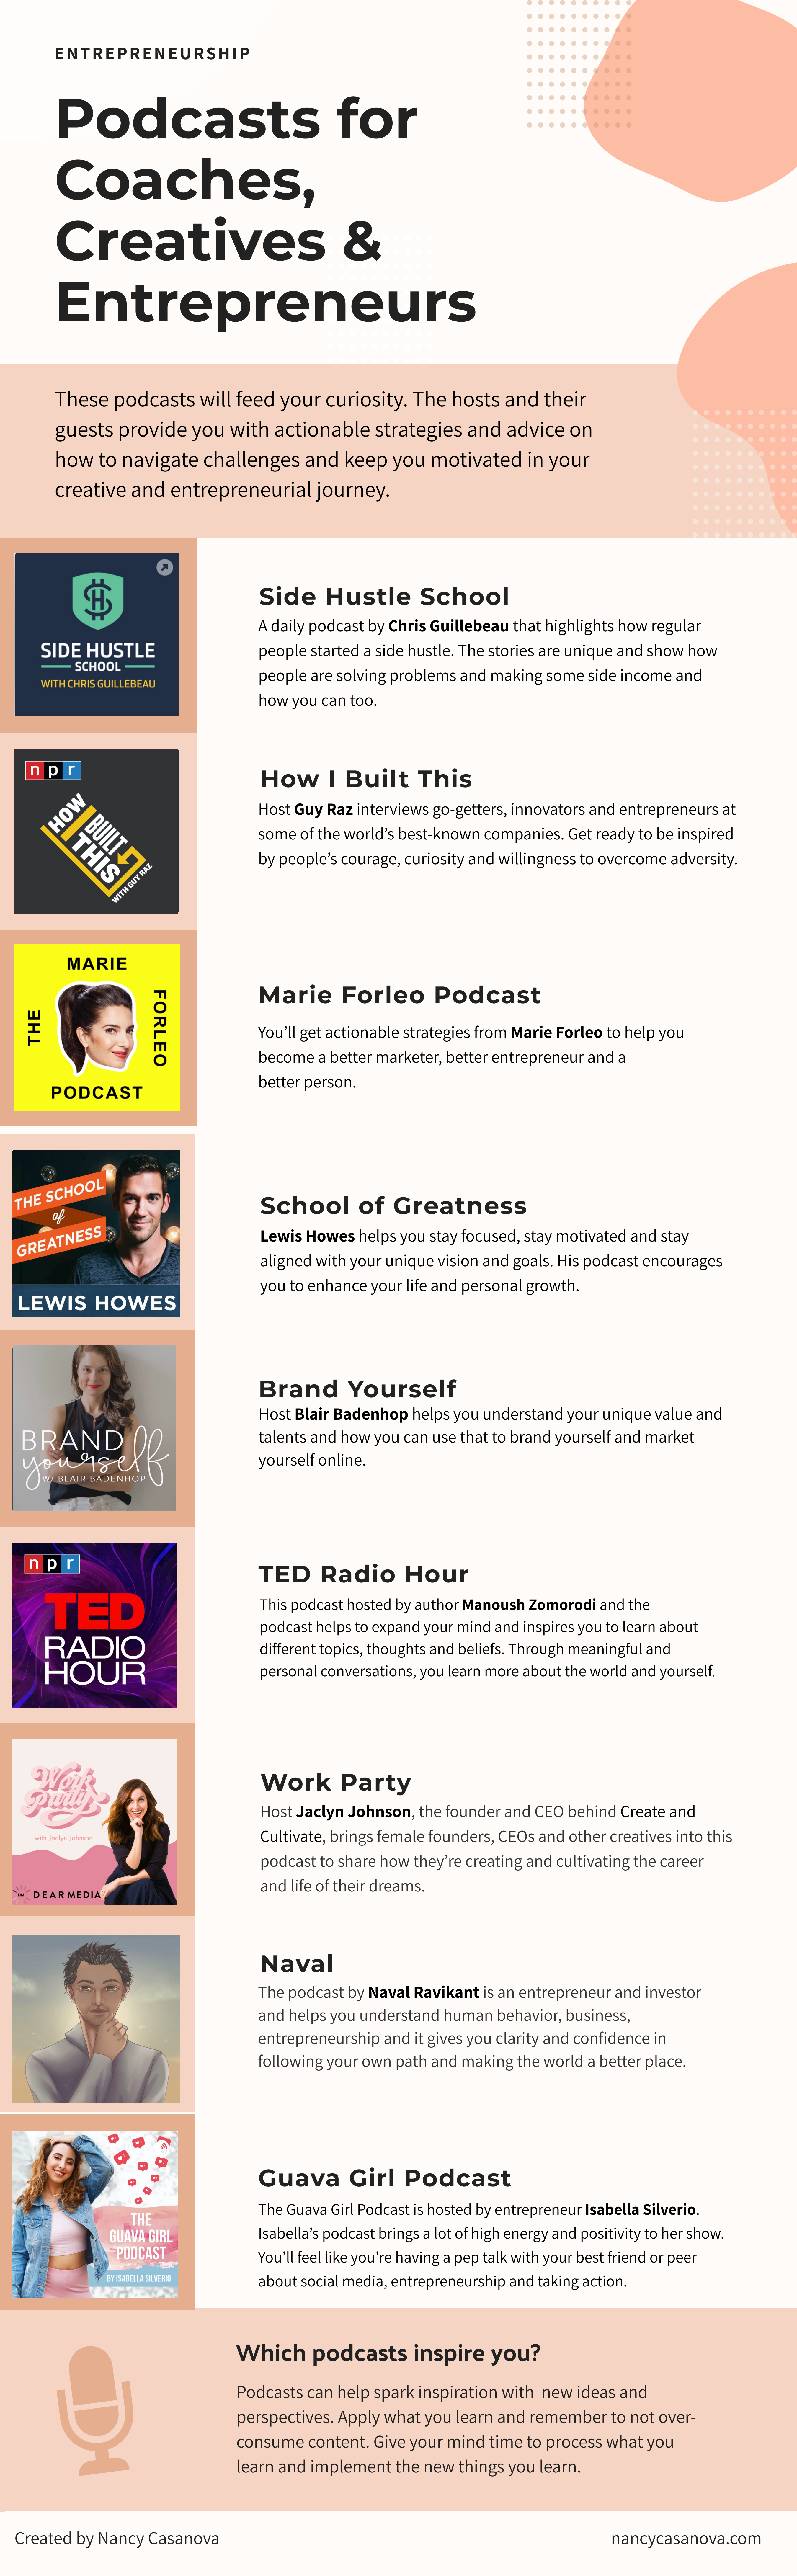 Here’s a list of podcasts that will feed your curiosity and keep you motivated along your entrepreneurial journey. | podcasts for entrepreneurs, podcasts for entrepreneurs business, podcast for women entrepreneurs, best podcasts for entrepreneurs, podcasts for female entrepreneurs, podcasts for creative entrepreneurs, best podcasts for female entrepreneurs, podcasts for coaches and creatives, podcasts for business owners, podcast for small business owners, entrepreneurship, small business, side jobs, side hustle, creative entrepreneur | nancycasanova.com